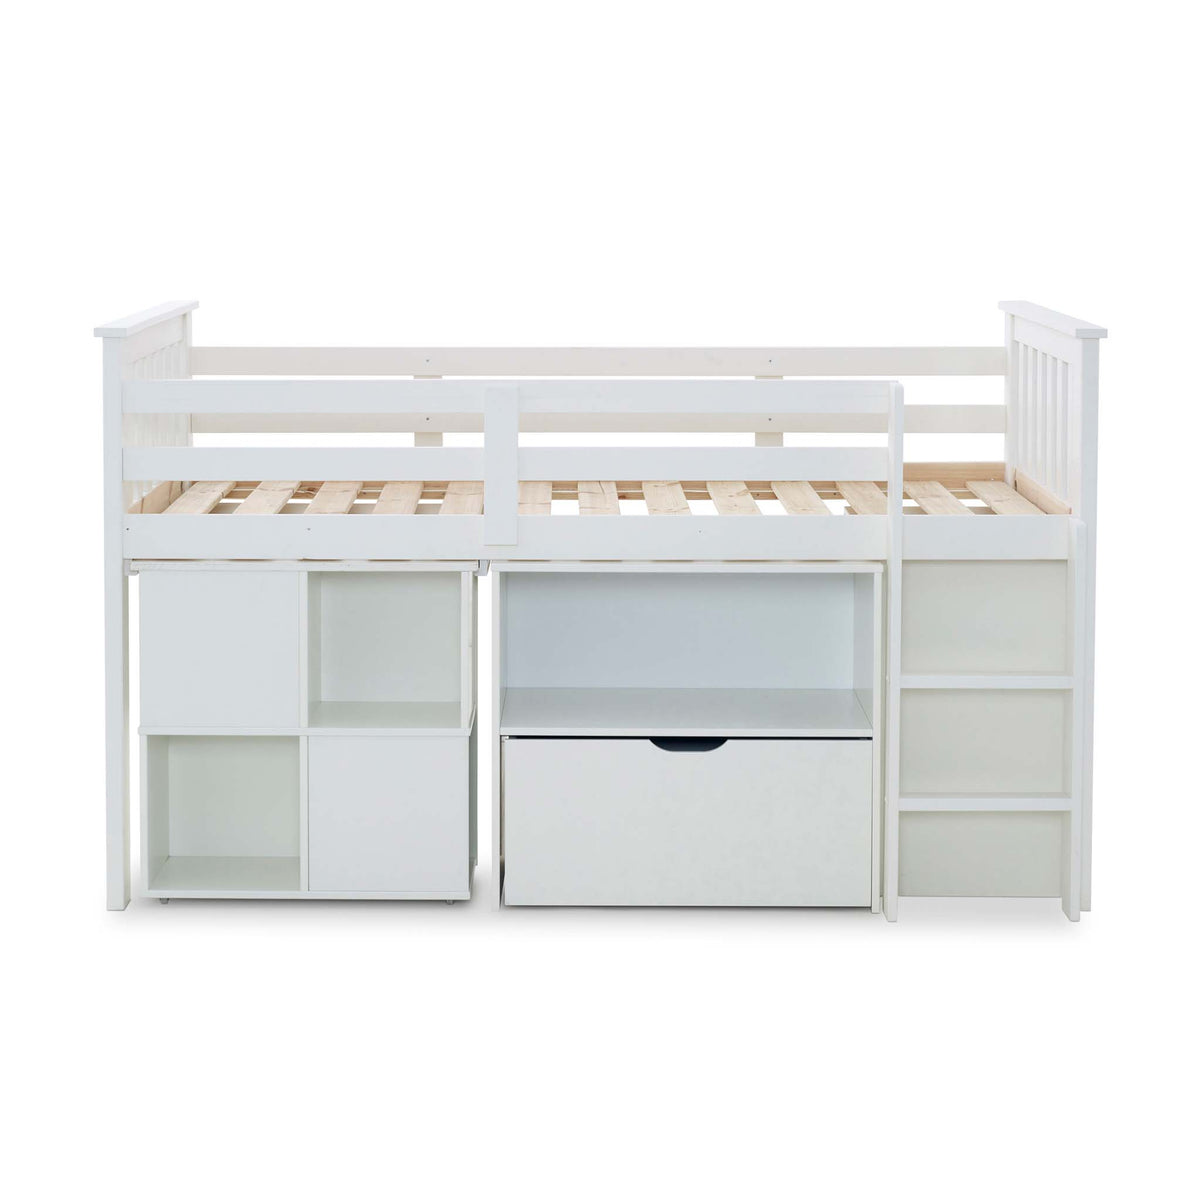 side view of the Huckerby White Childrens Sleep Station Storage Bed